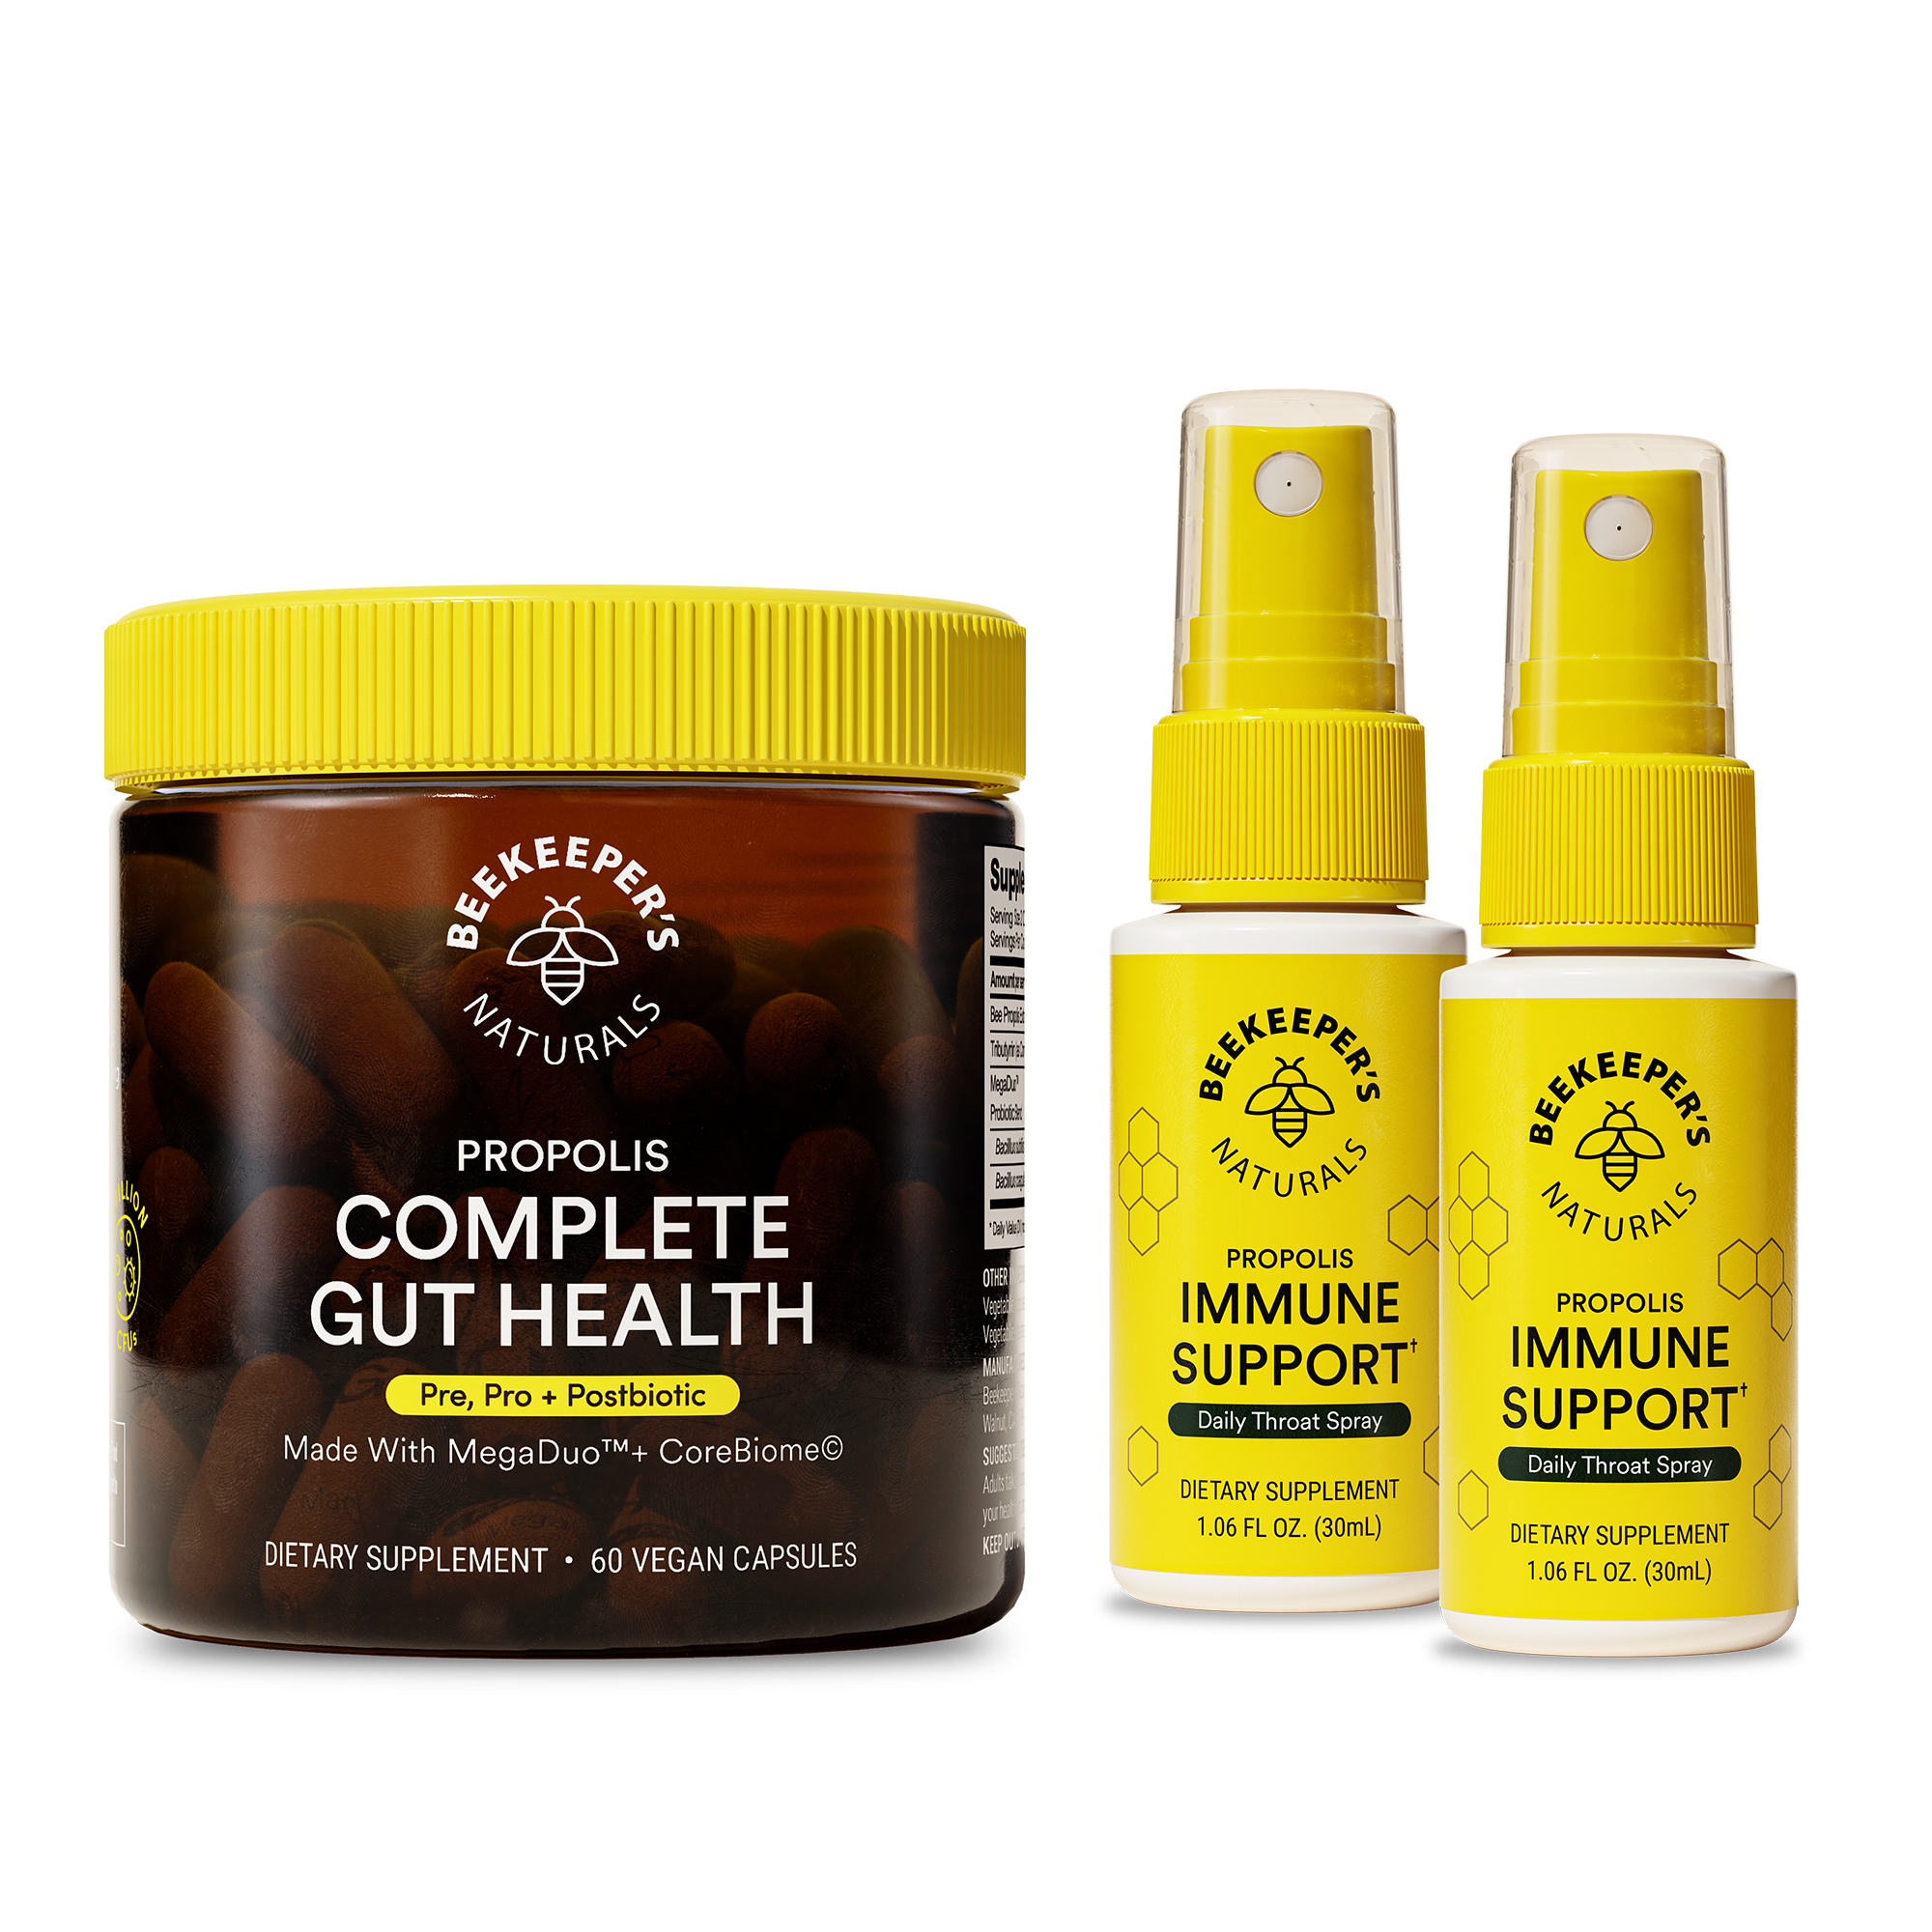 Beekeeper's Naturals Review: Organic Products From Bees for Immune System